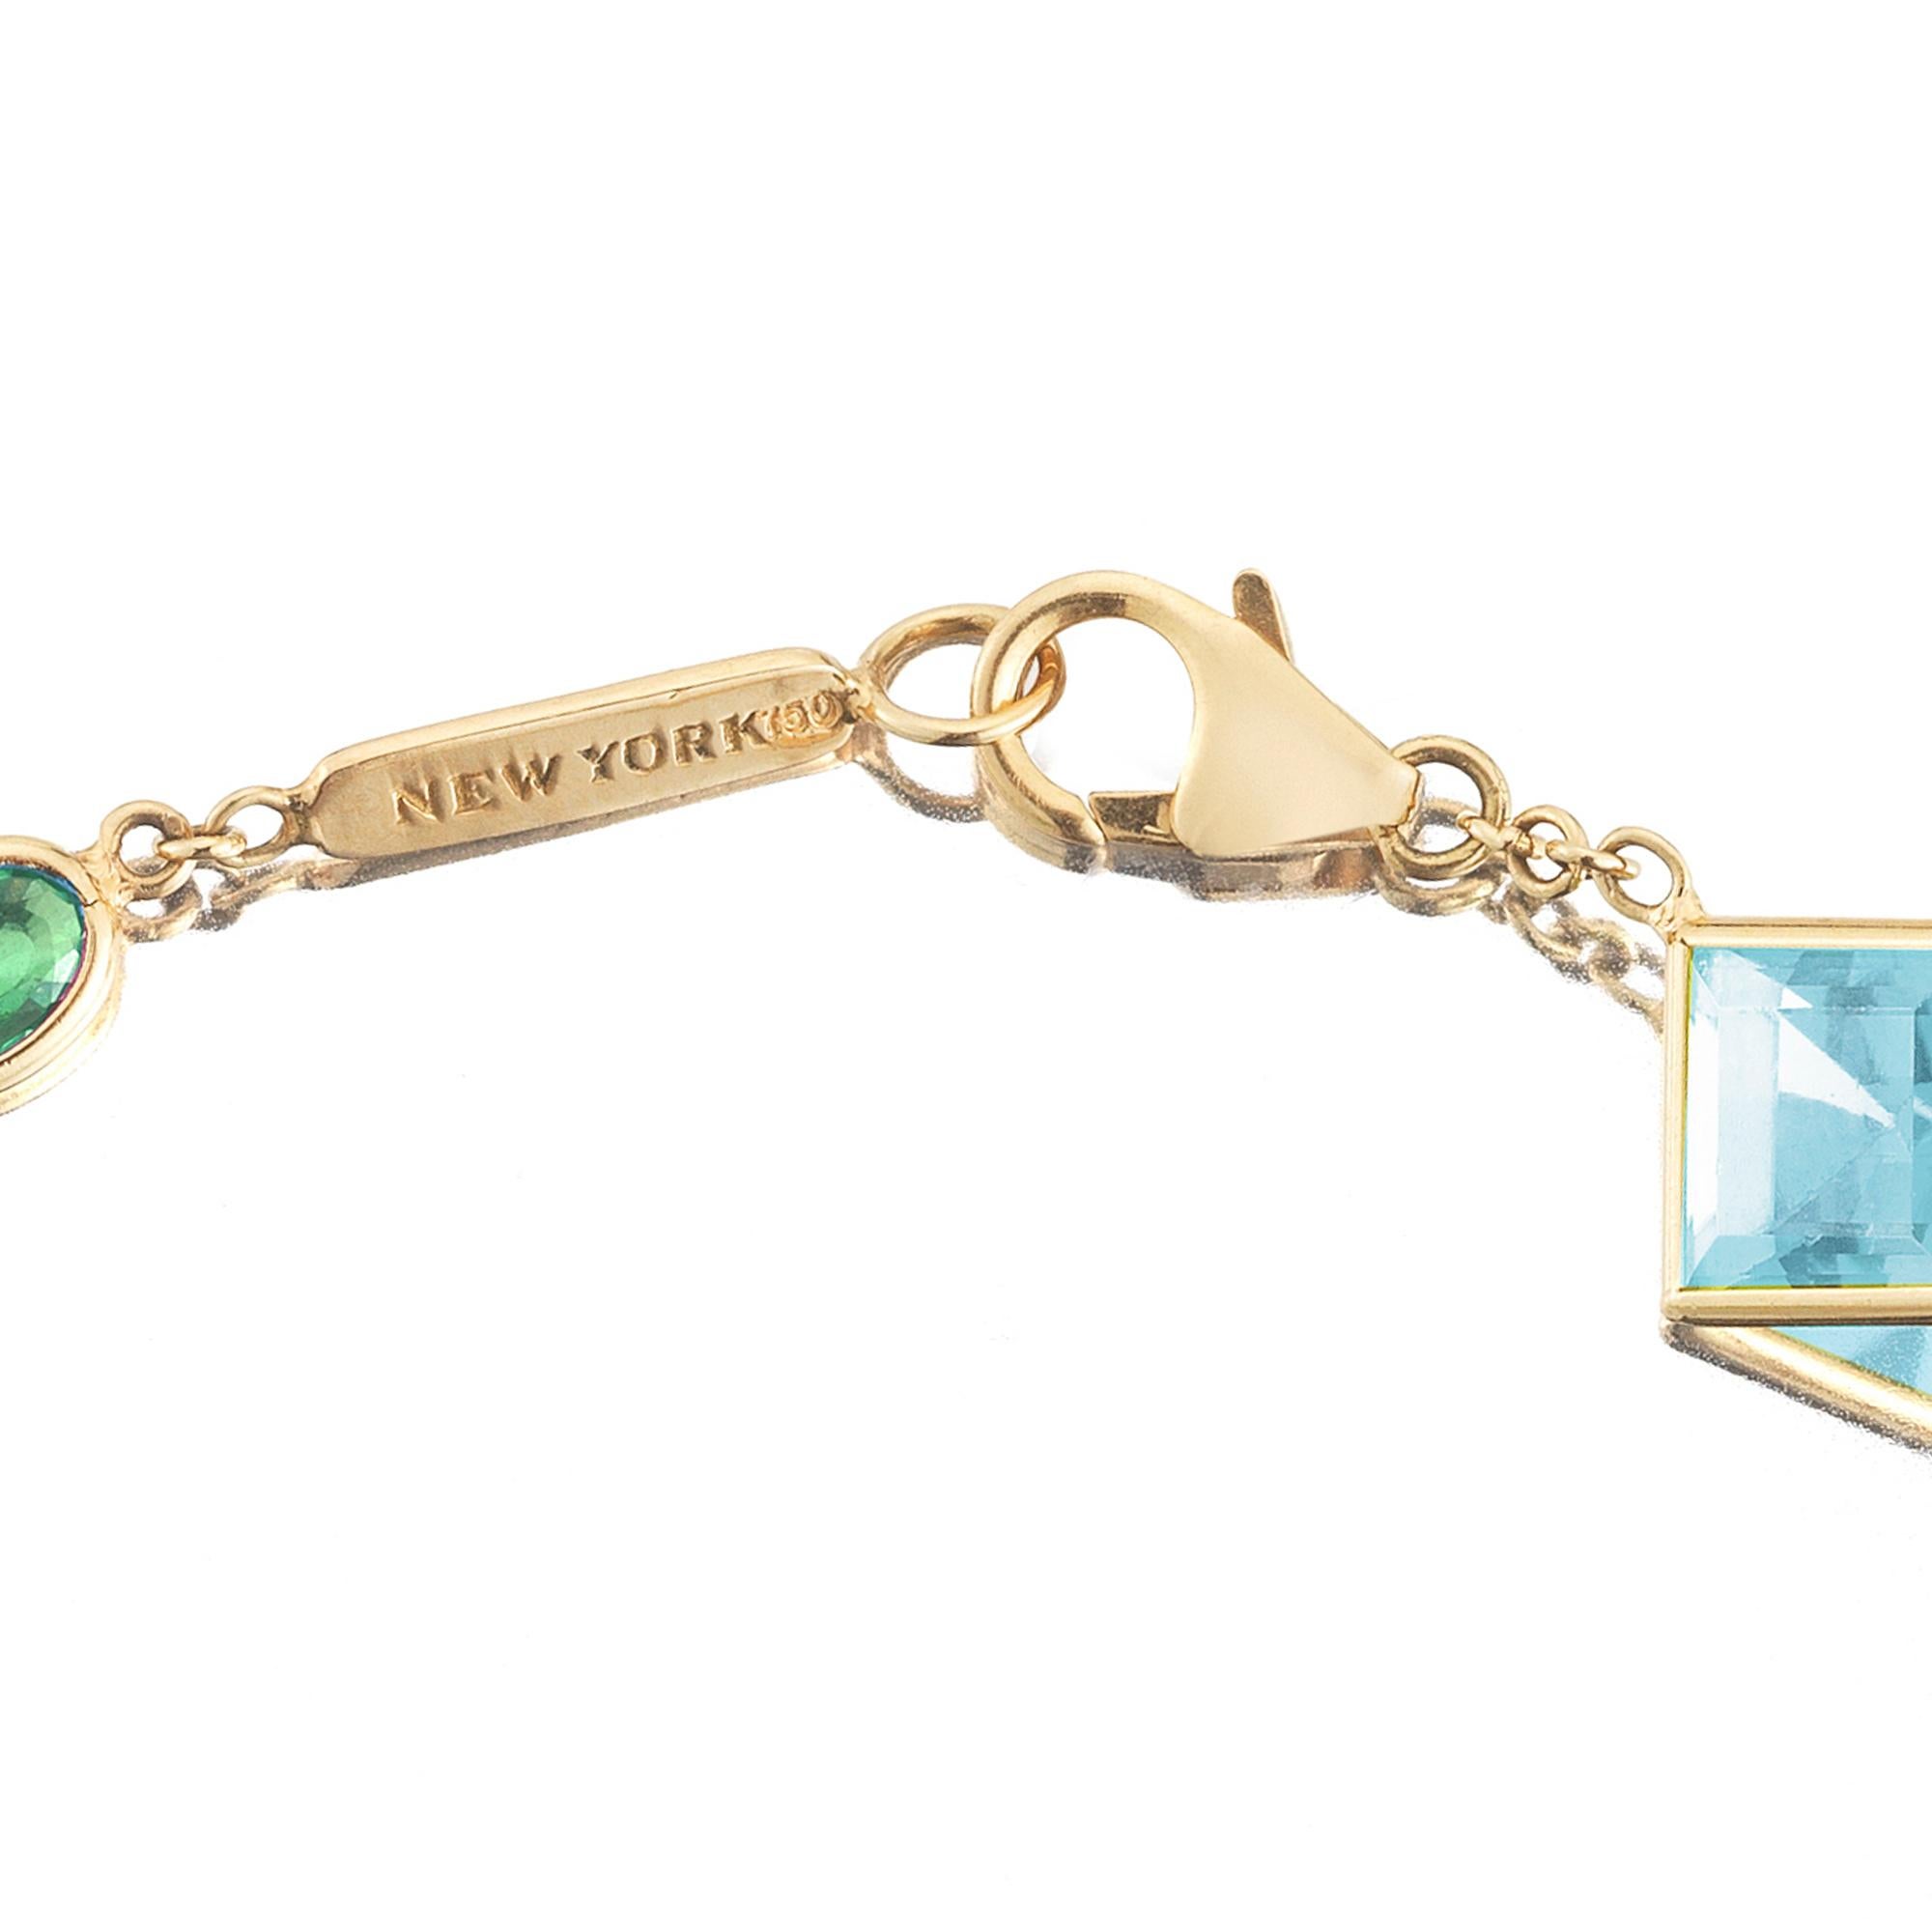 18kt yellow gold Florentine station bracelet with bezel set emerald-cut blue topaz and round tsavorite garnets, and signature Brillante® motif.

Inspired by the Garden of the Iris, the Florentine collection pairs bold color combinations of geometric